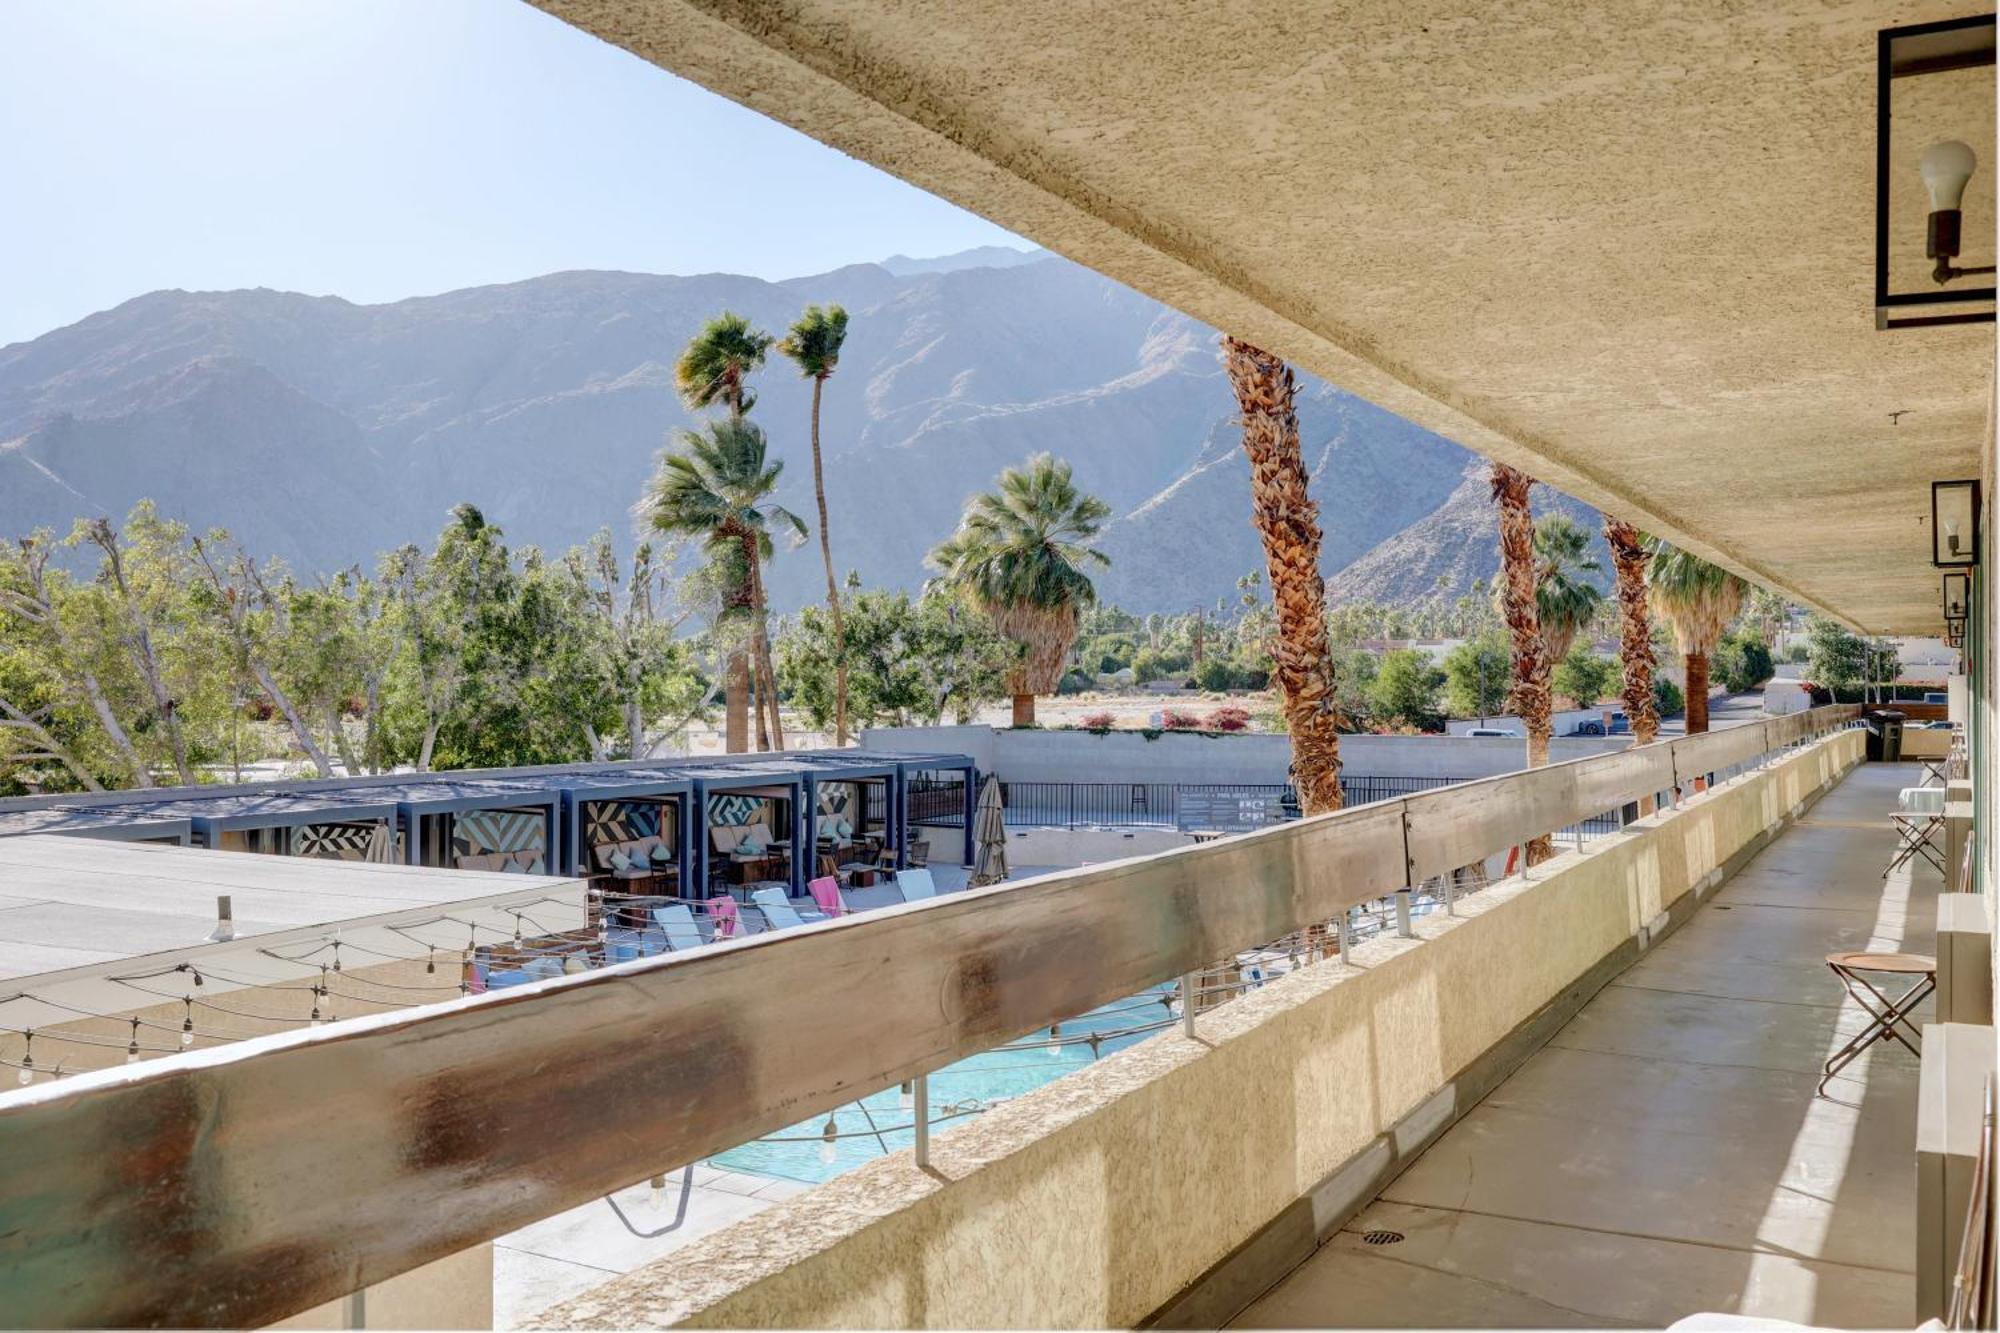 The Infusion Beach Club Palm Springs Exterior foto